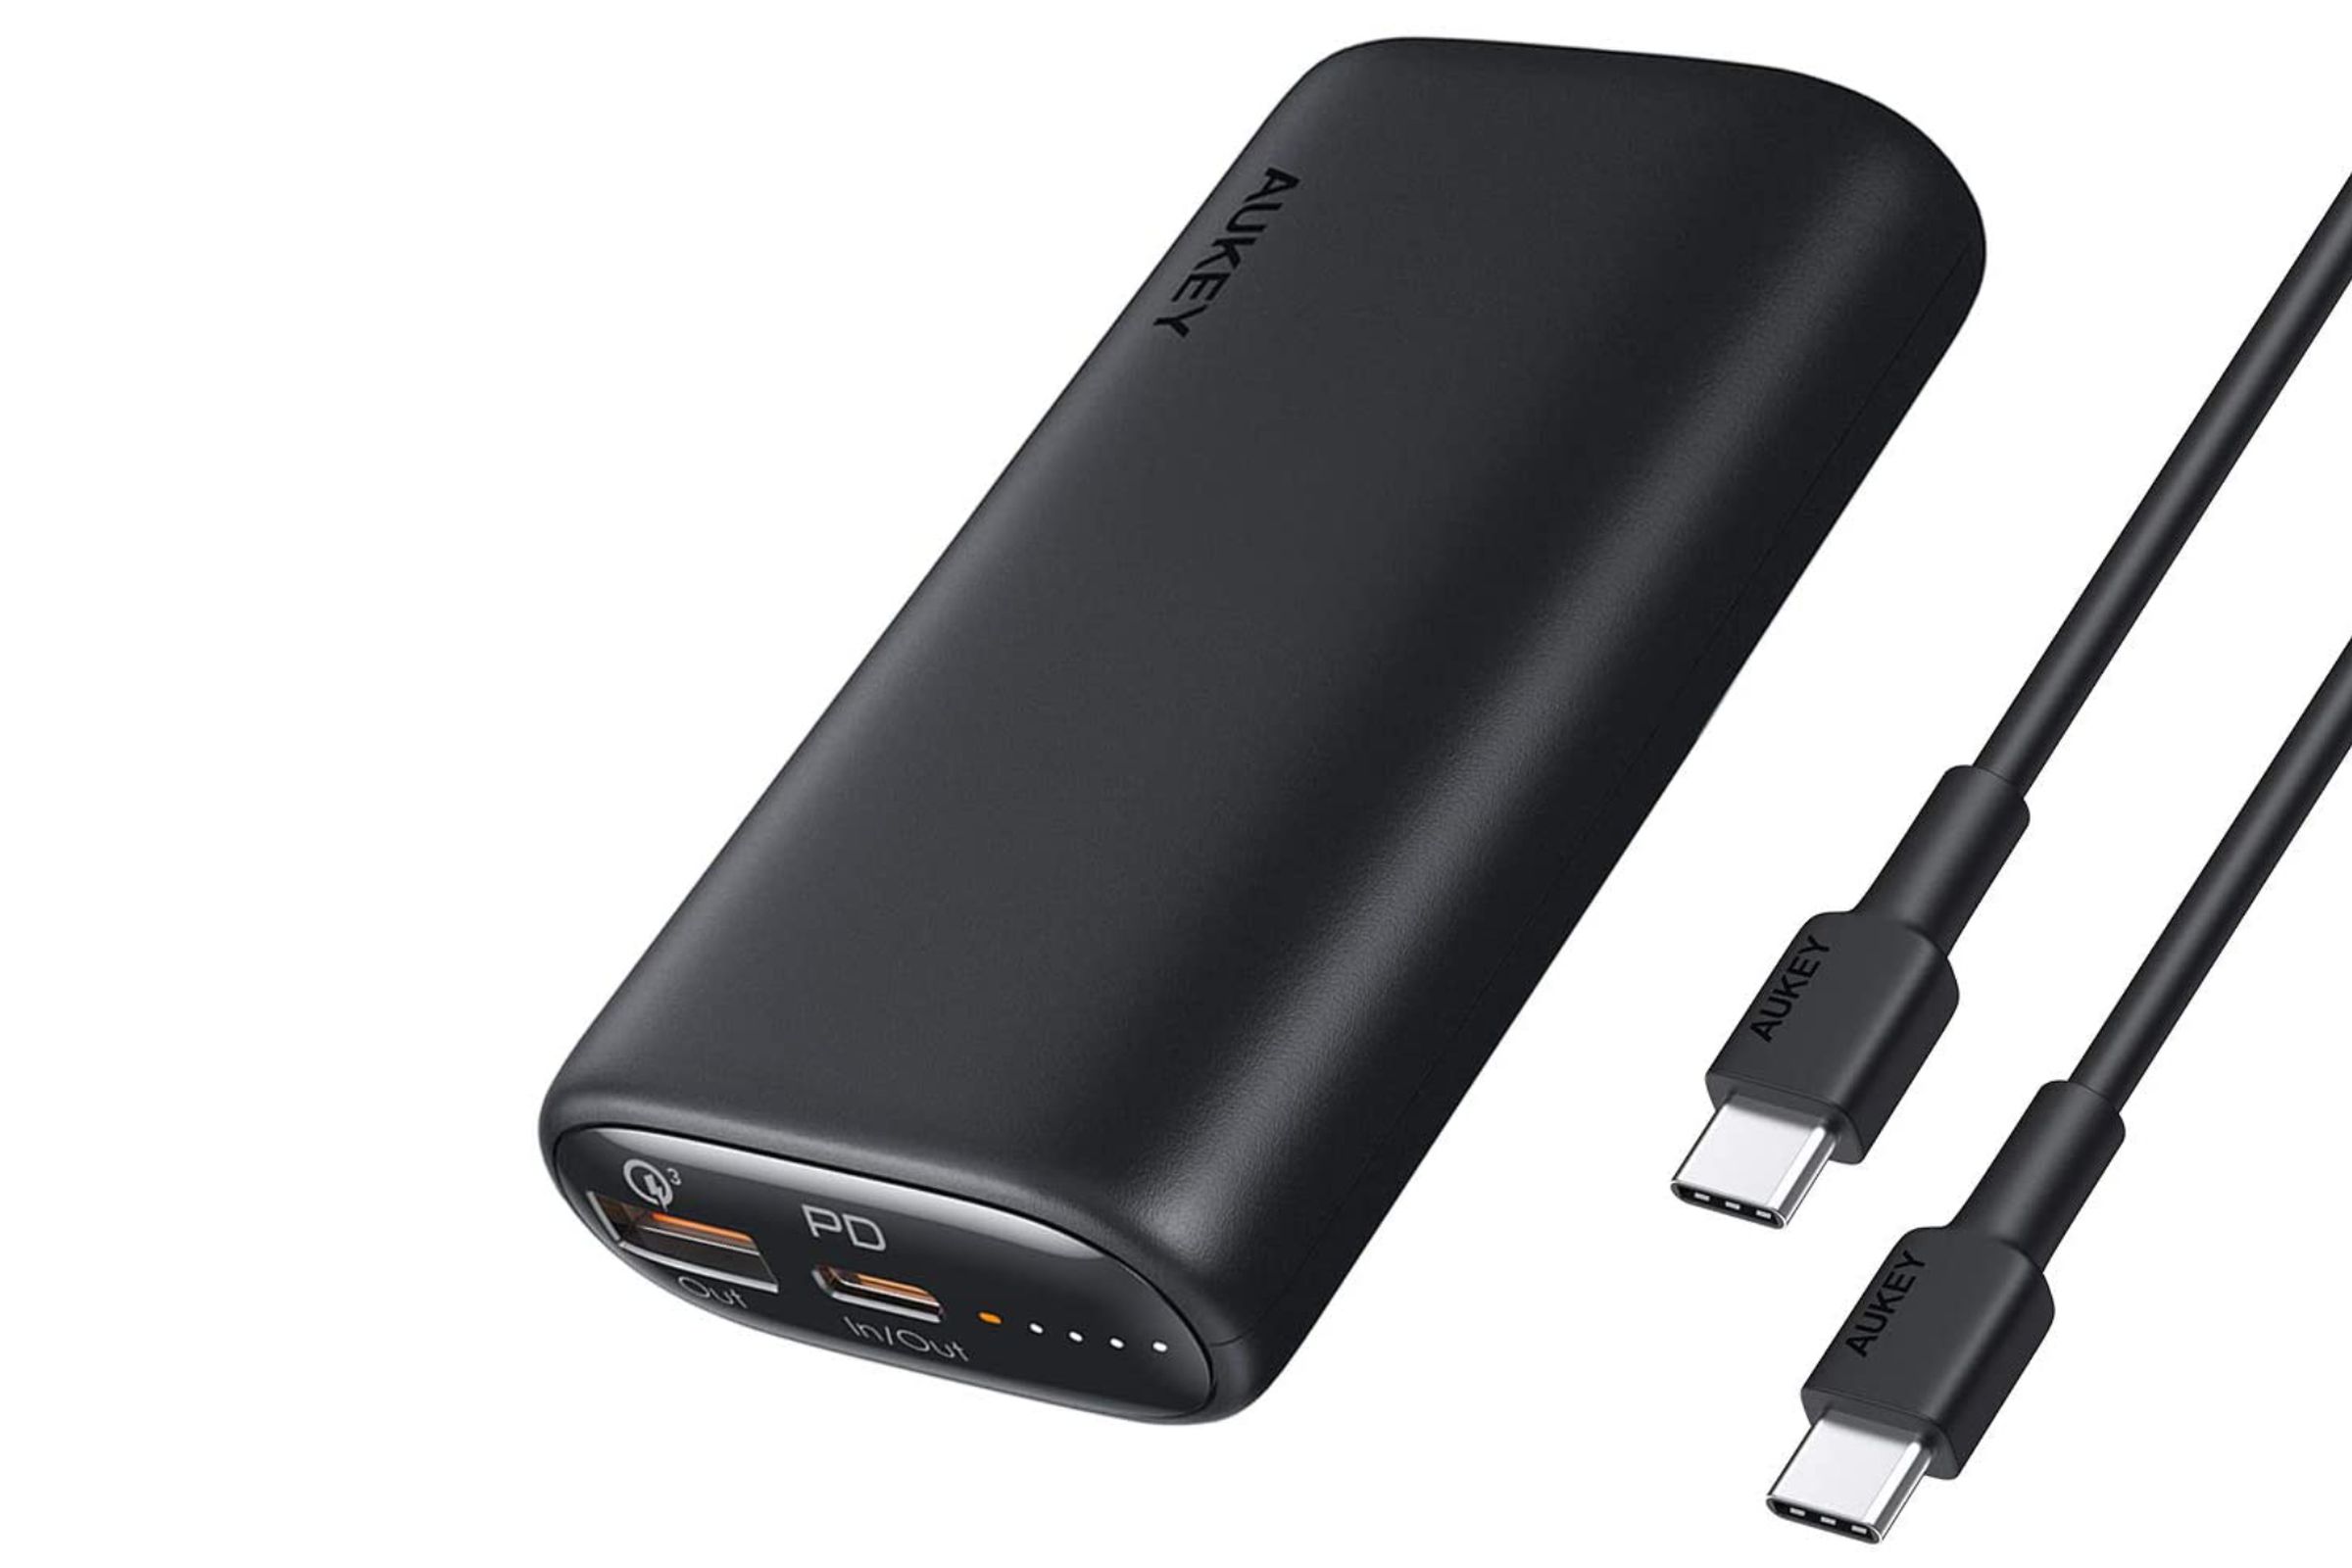 An Aukey USB battery pack. These brands often included things like USB cables with batteries when other brands wouldn’t.